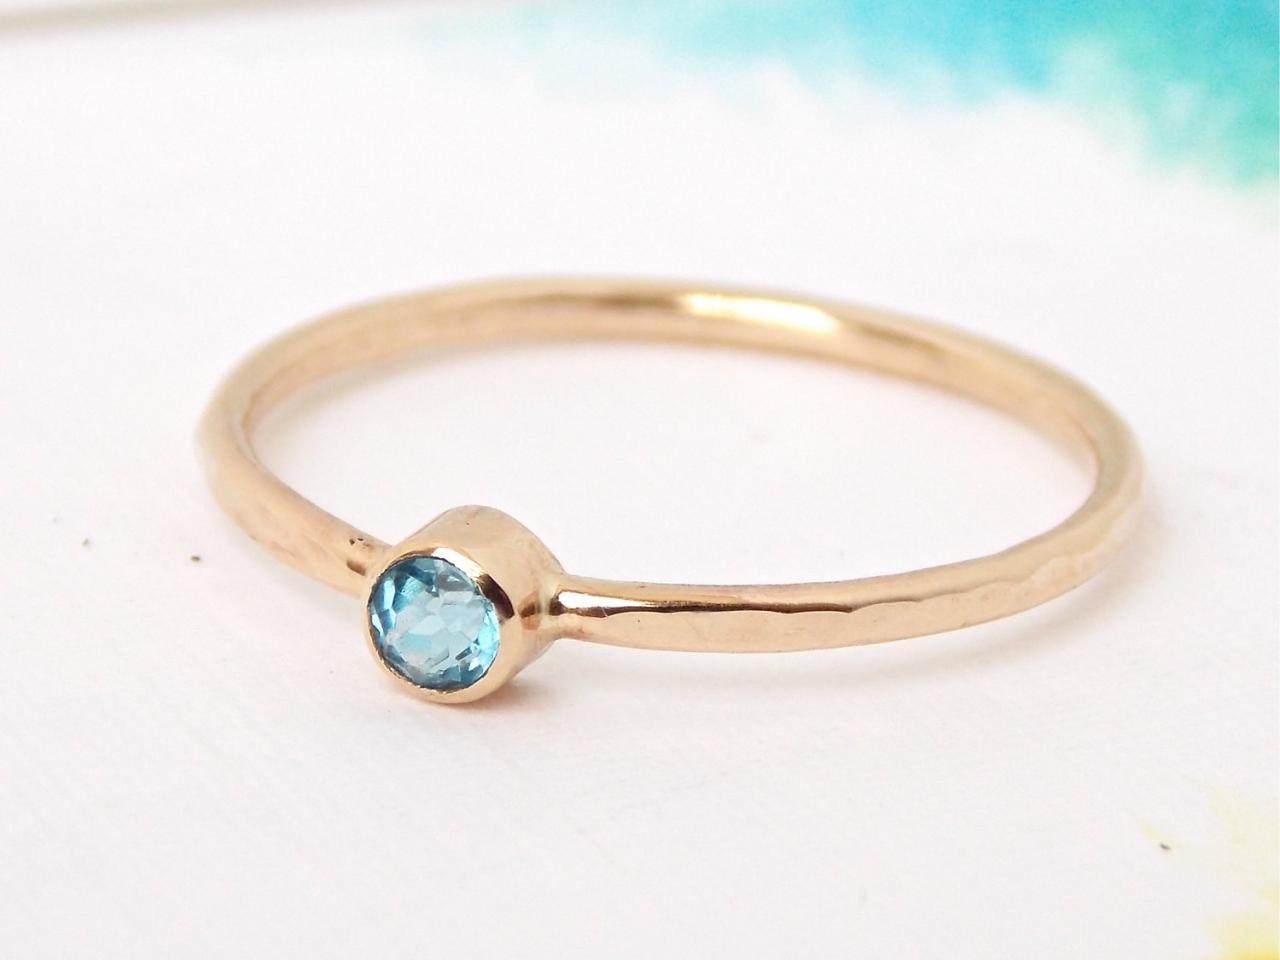 Simple Birthstone Ring W/ Hammered Band: Goldfilled Ring, Birthstone Ring, Dainty Ring, Simple Ring, Gold Ring, Hammered Ring, Hammered Band